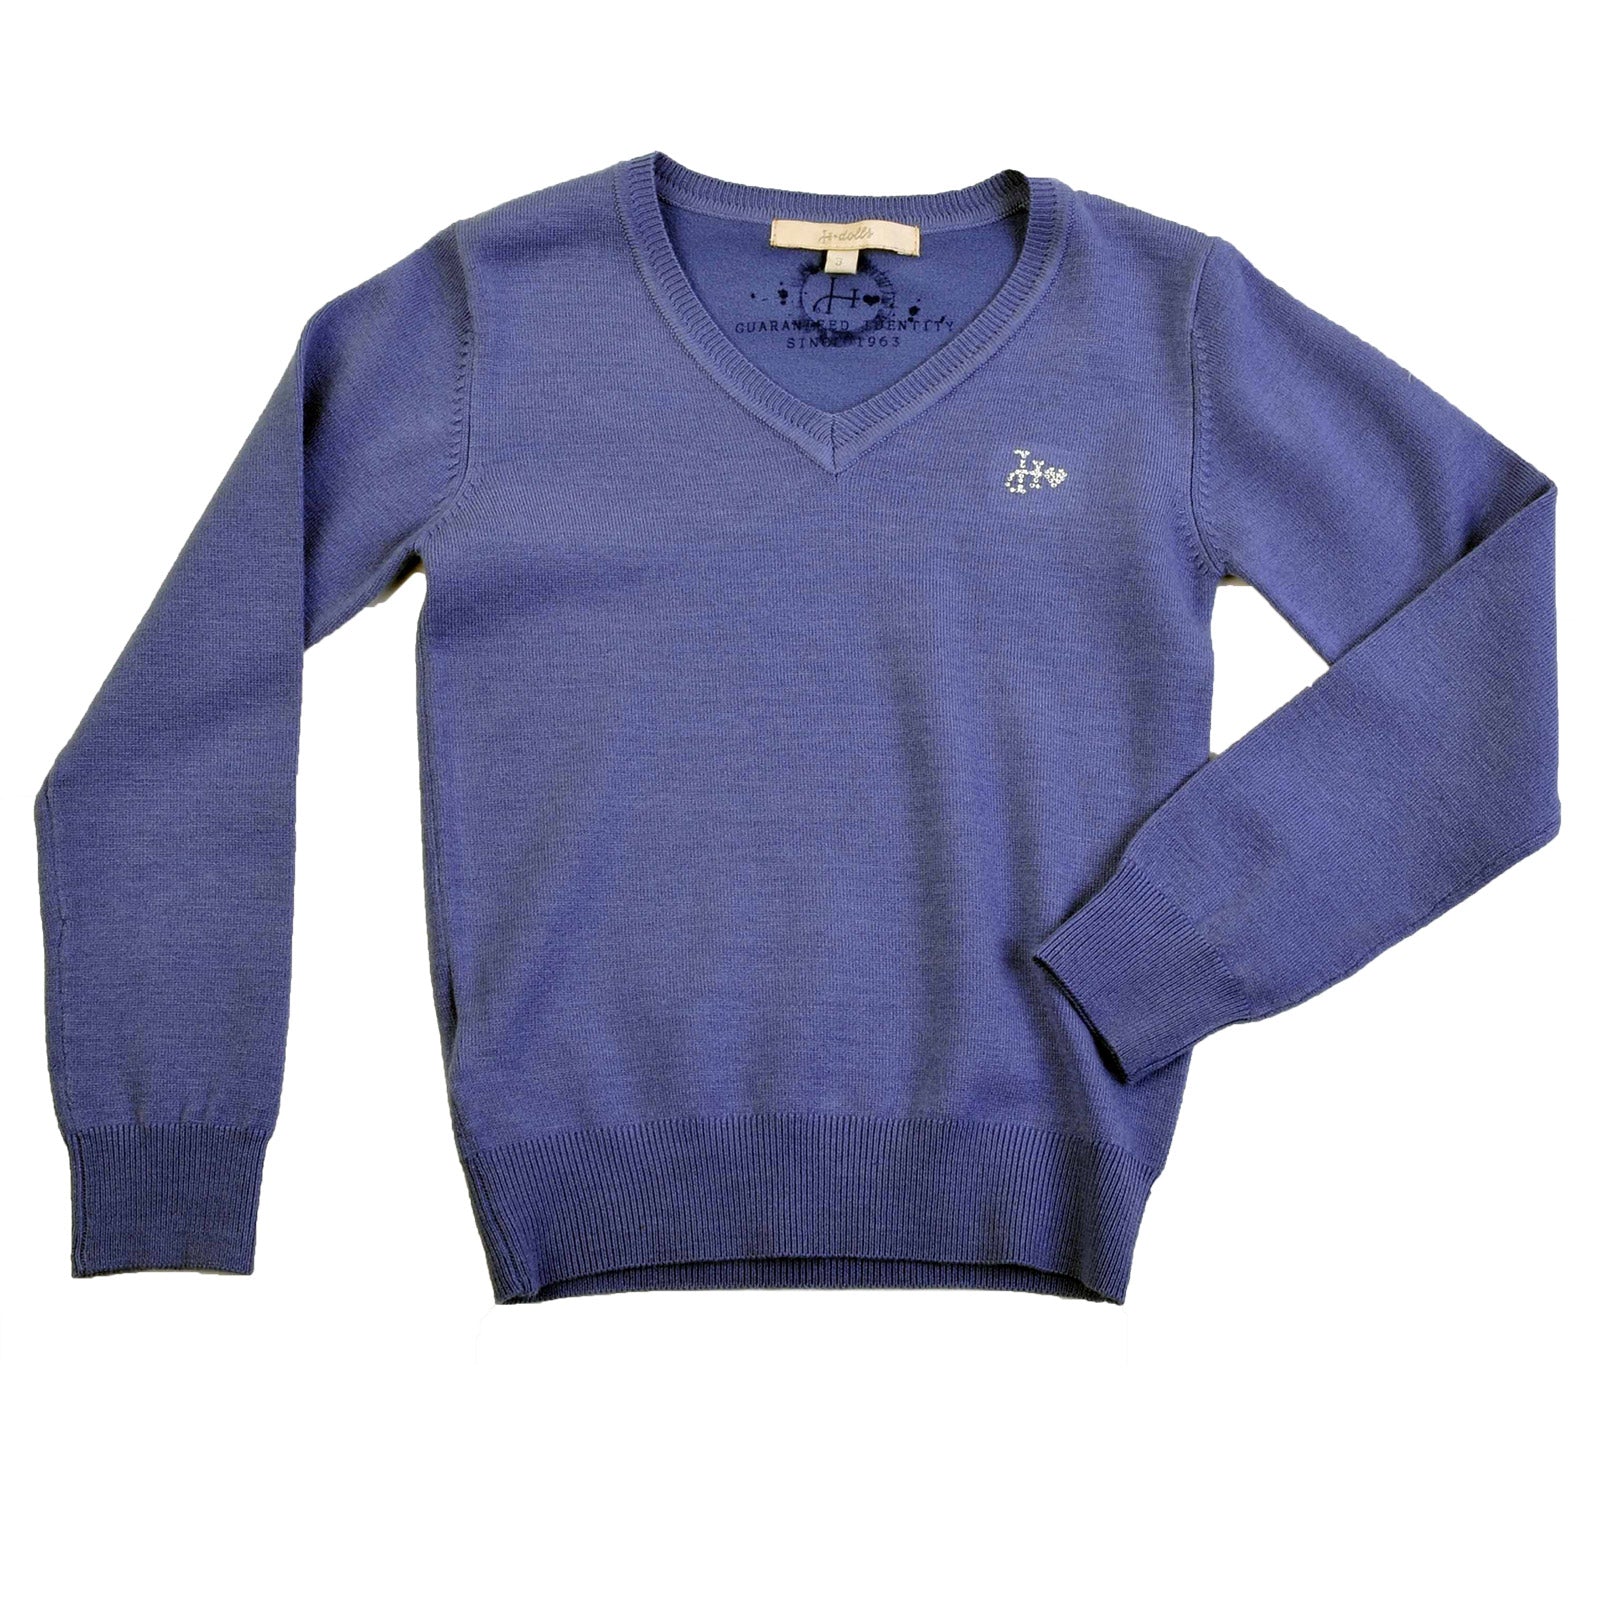 
  Basic sweater from the Silvian Heach girls' clothing line with v-neck, application of small rh...